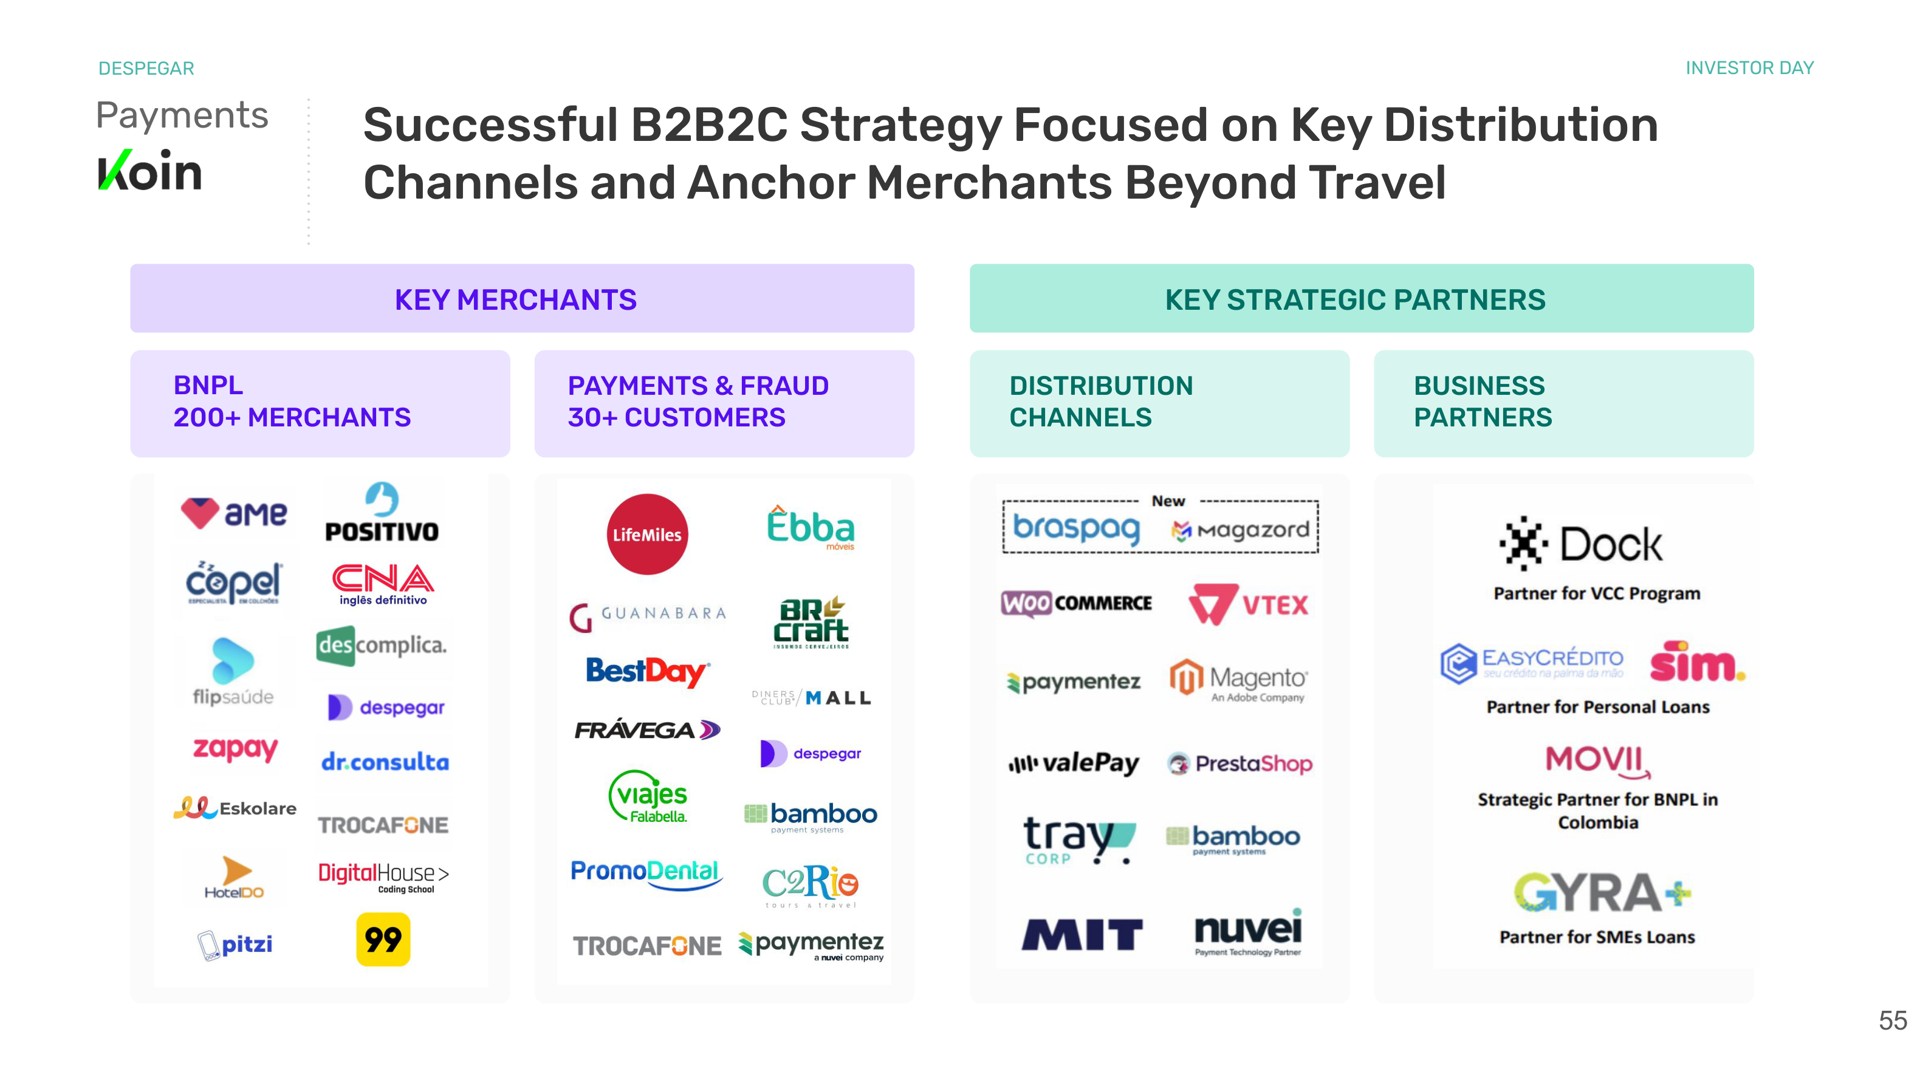 payments successful strategy focused on key distribution channels and anchor merchants beyond travel key merchants key strategic partners merchants payments fraud customers distribution channels business partners dock | Despegar